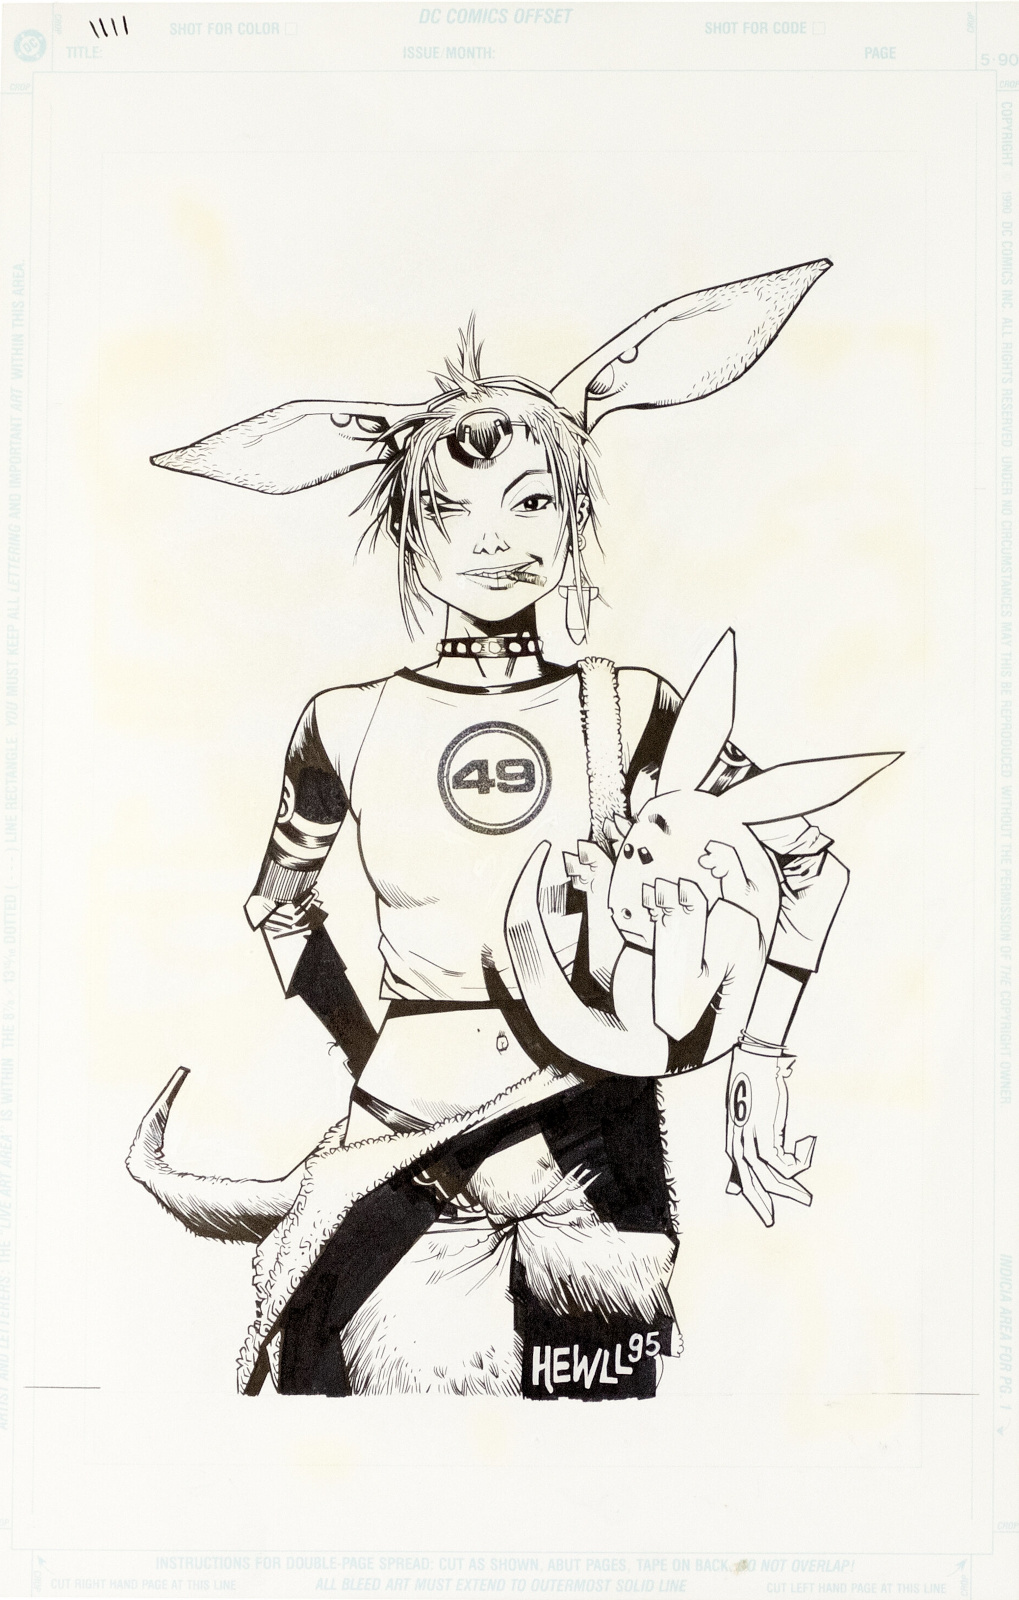 Tank Girl The Odyssey issue 1 cover by Jamie Hewlett